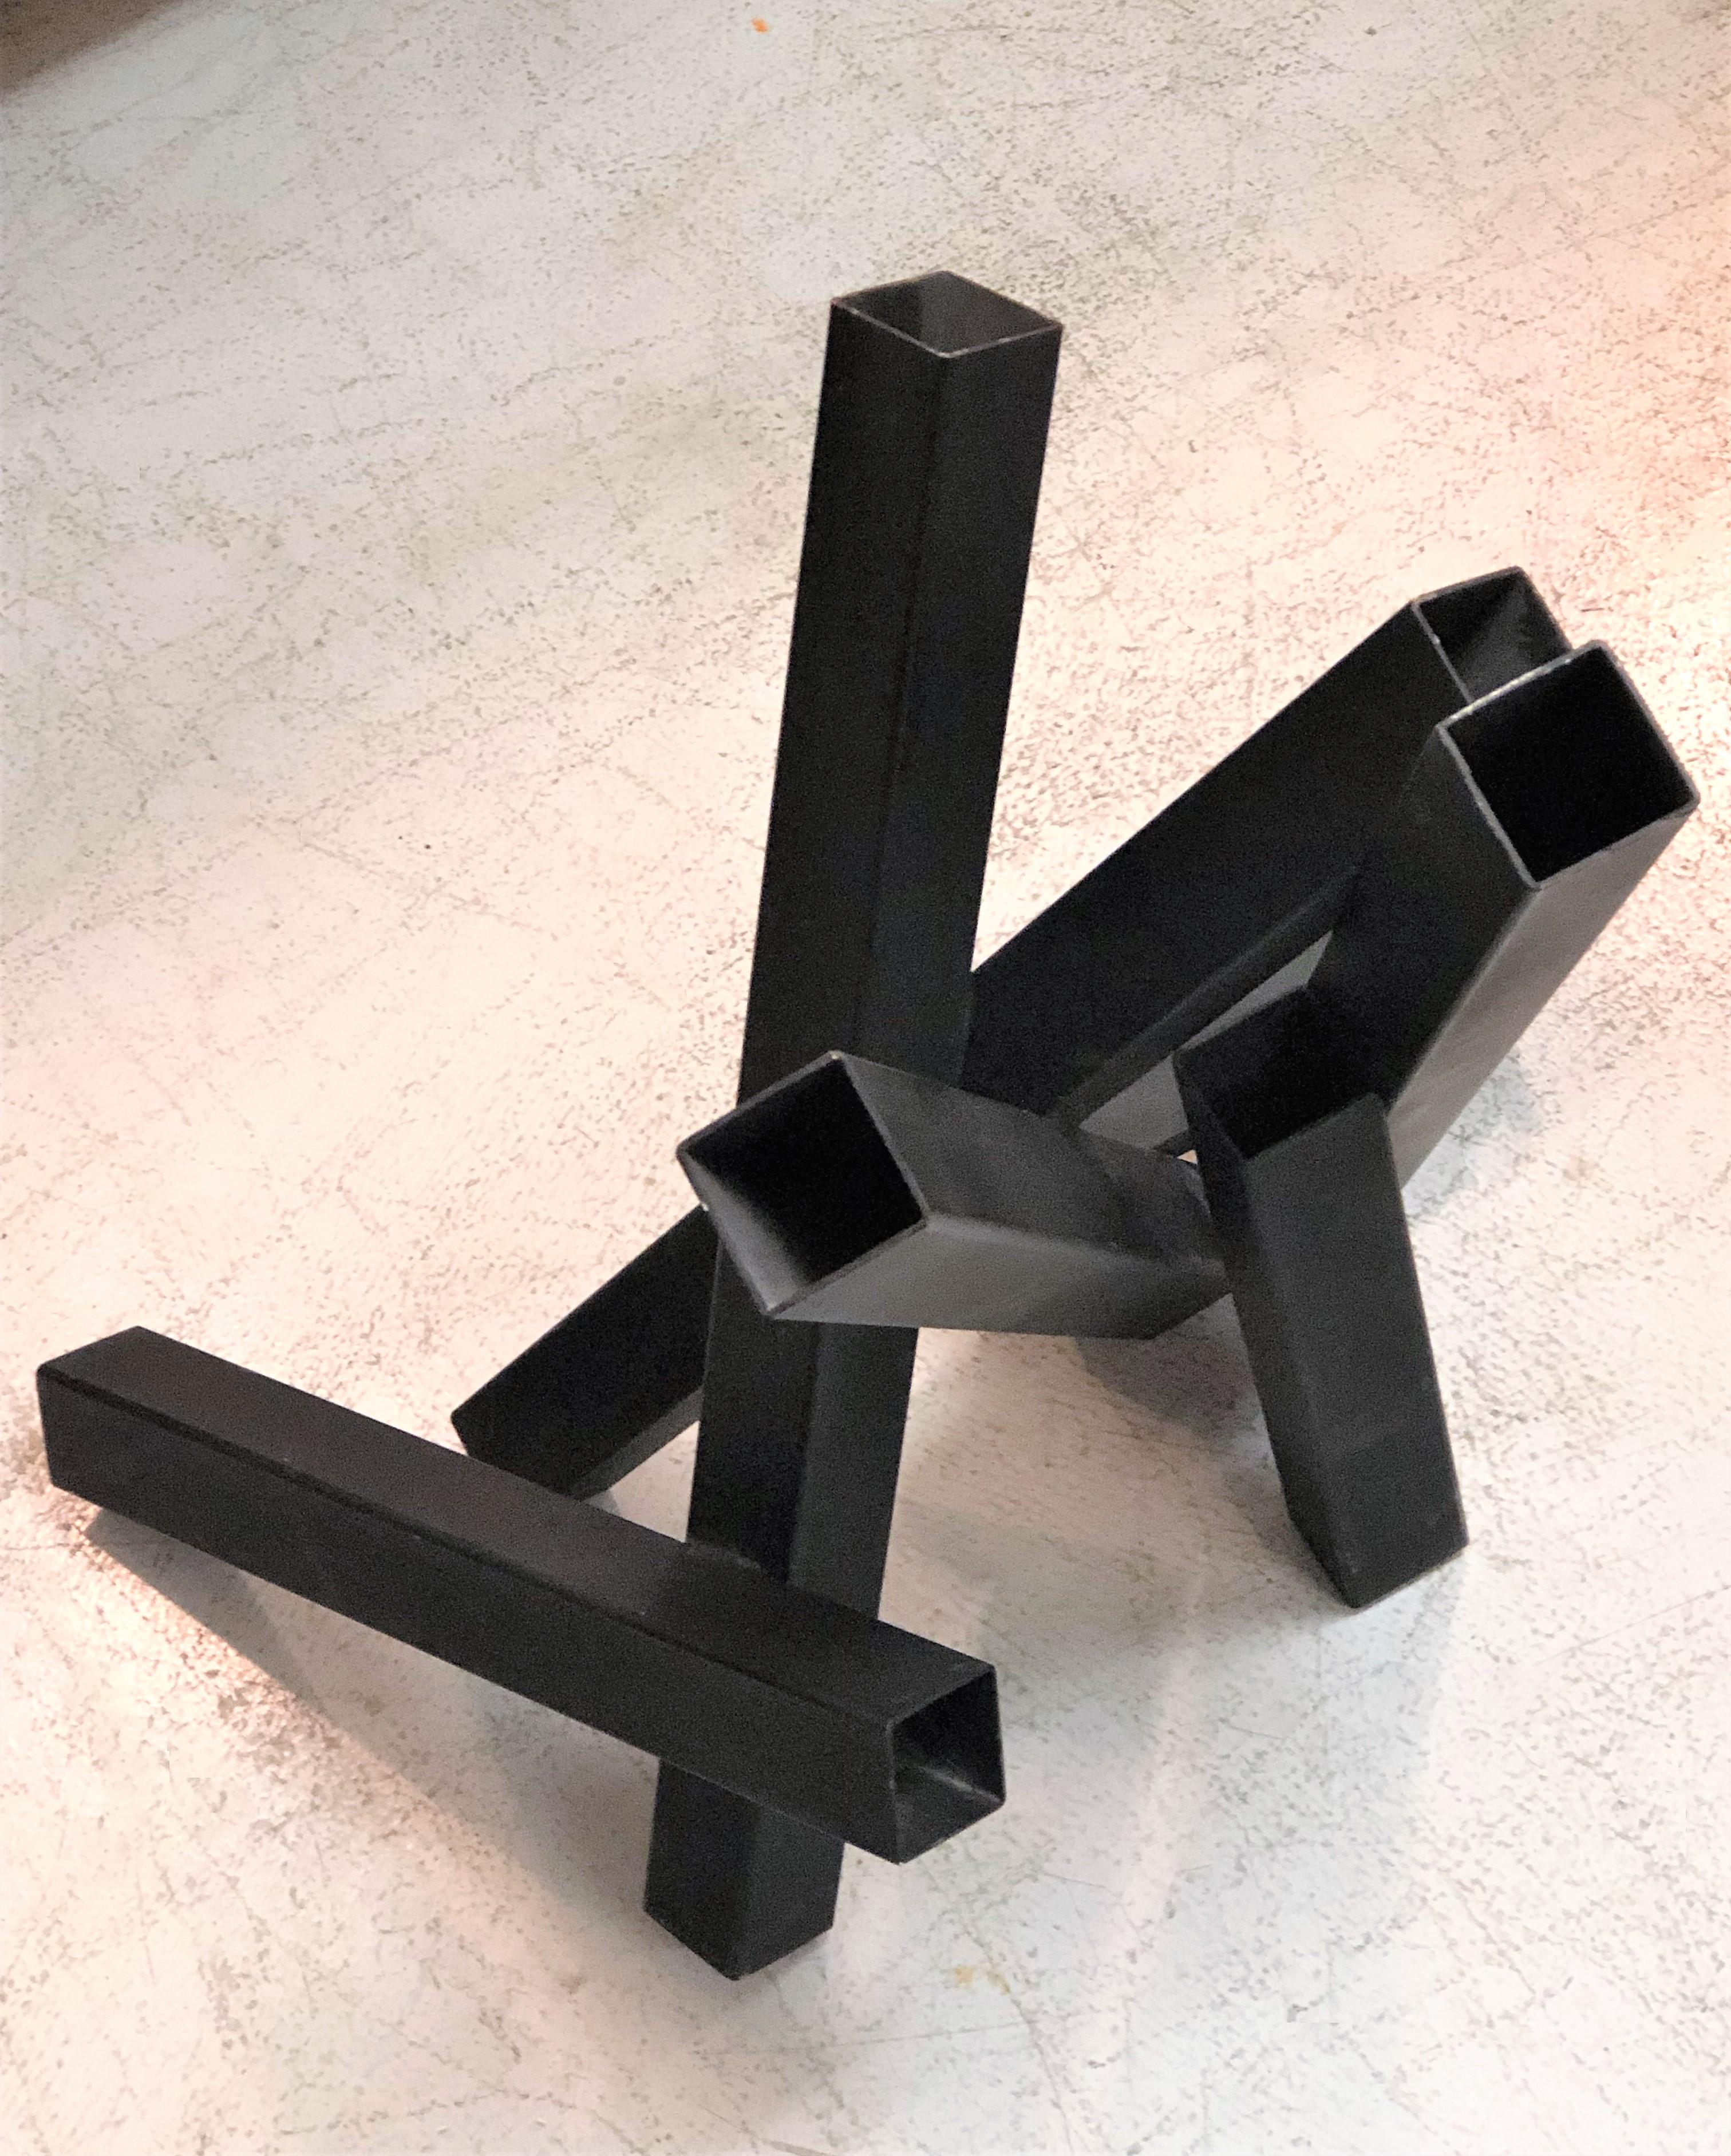 Tony Rosenthal Abstract Steel and Black Enamel Sculpture (Emailliert)